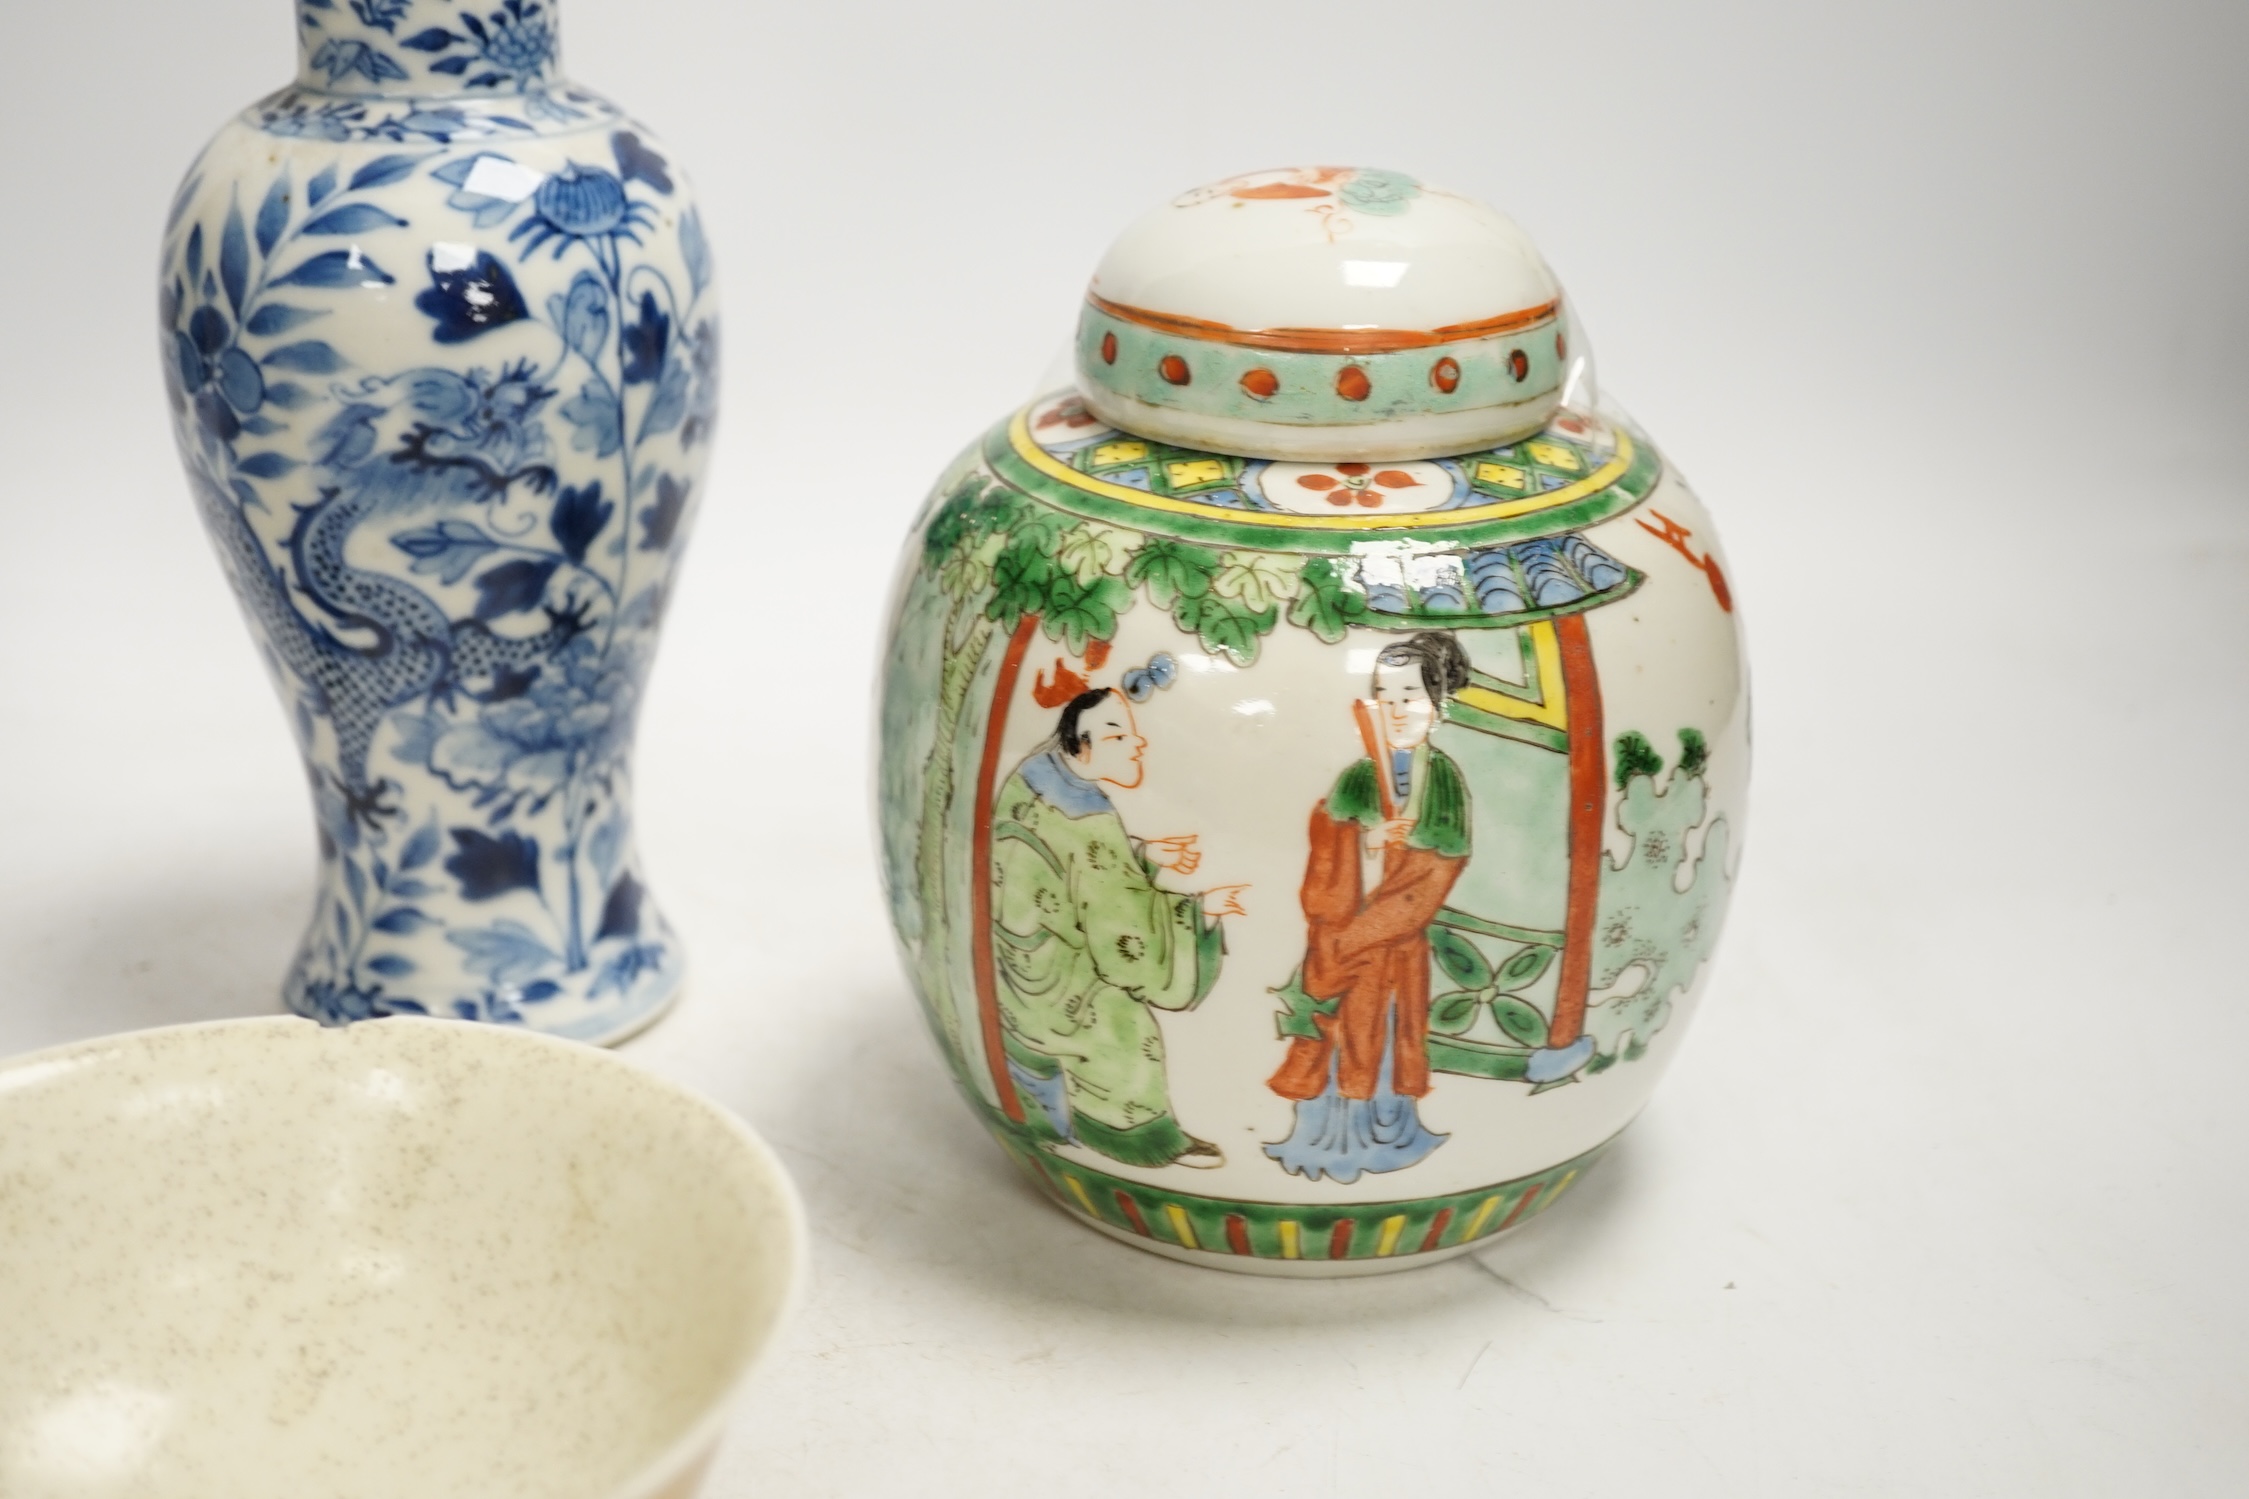 Chinese ceramics to include a crackleware vase and a blue and white vase, a jar and cover and a rice bowl, tallest 20cm high. Condition - all items damaged, overall poor